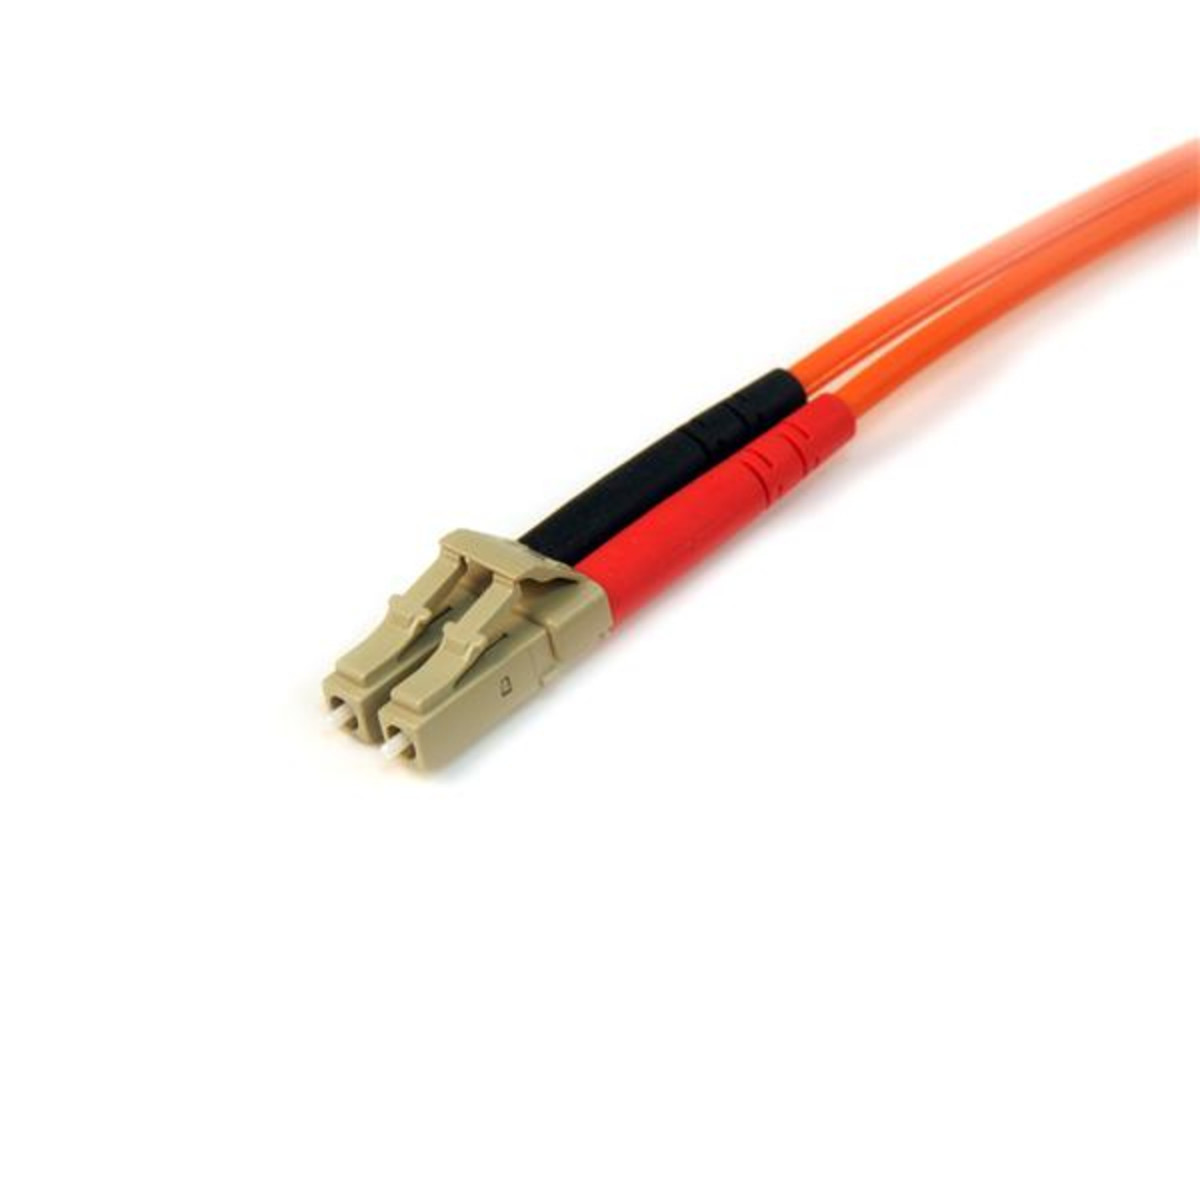 10m MM 50/125 Duplex Patch Cable LC - LC